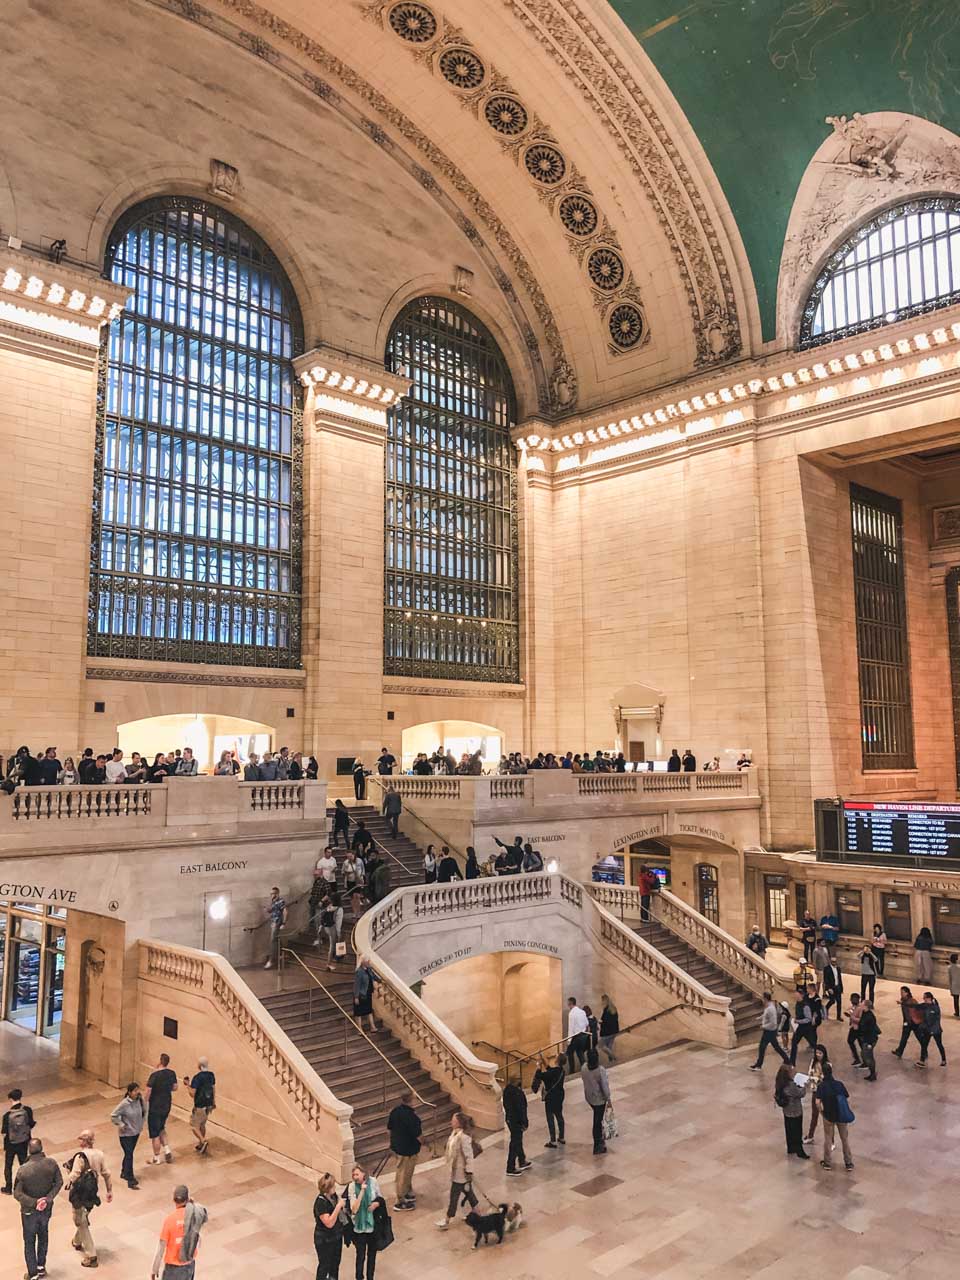 The Main Concourse of the Grand Central Terminal in New York